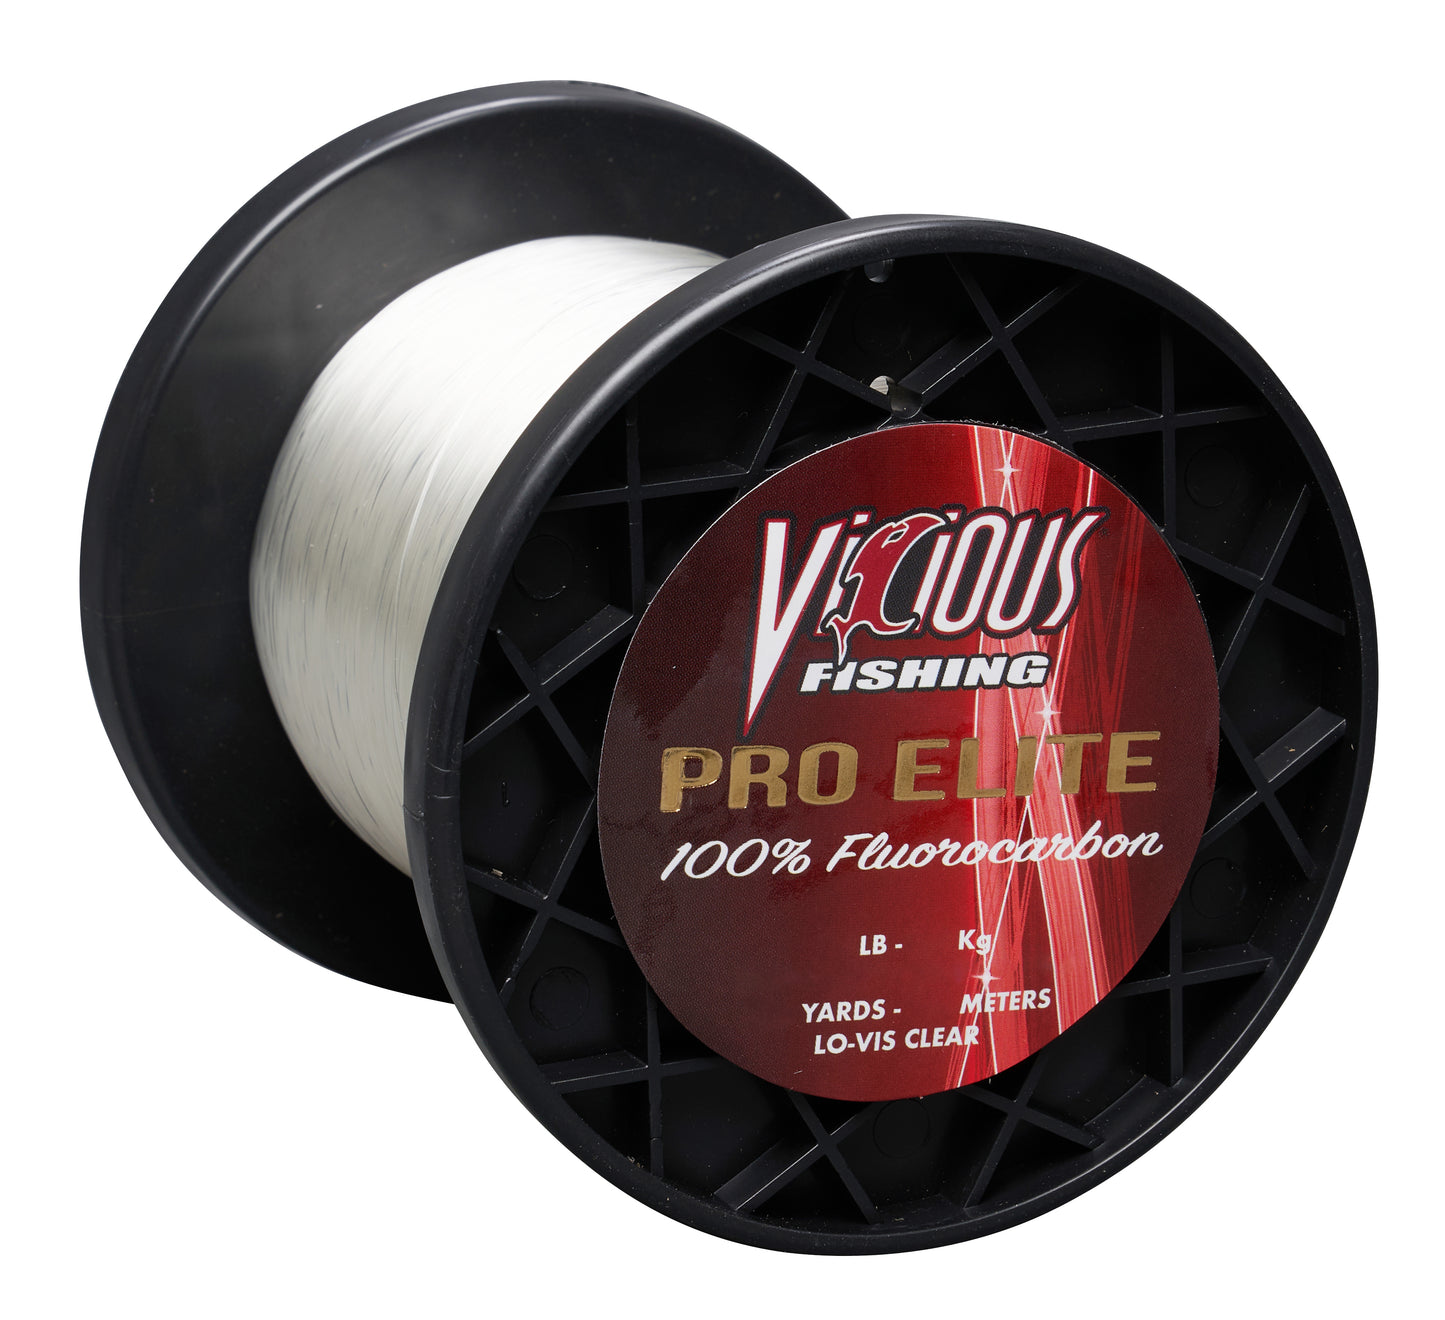 Vicious Fishing Fluorocarbon Fishing Line Review - Tackle Test